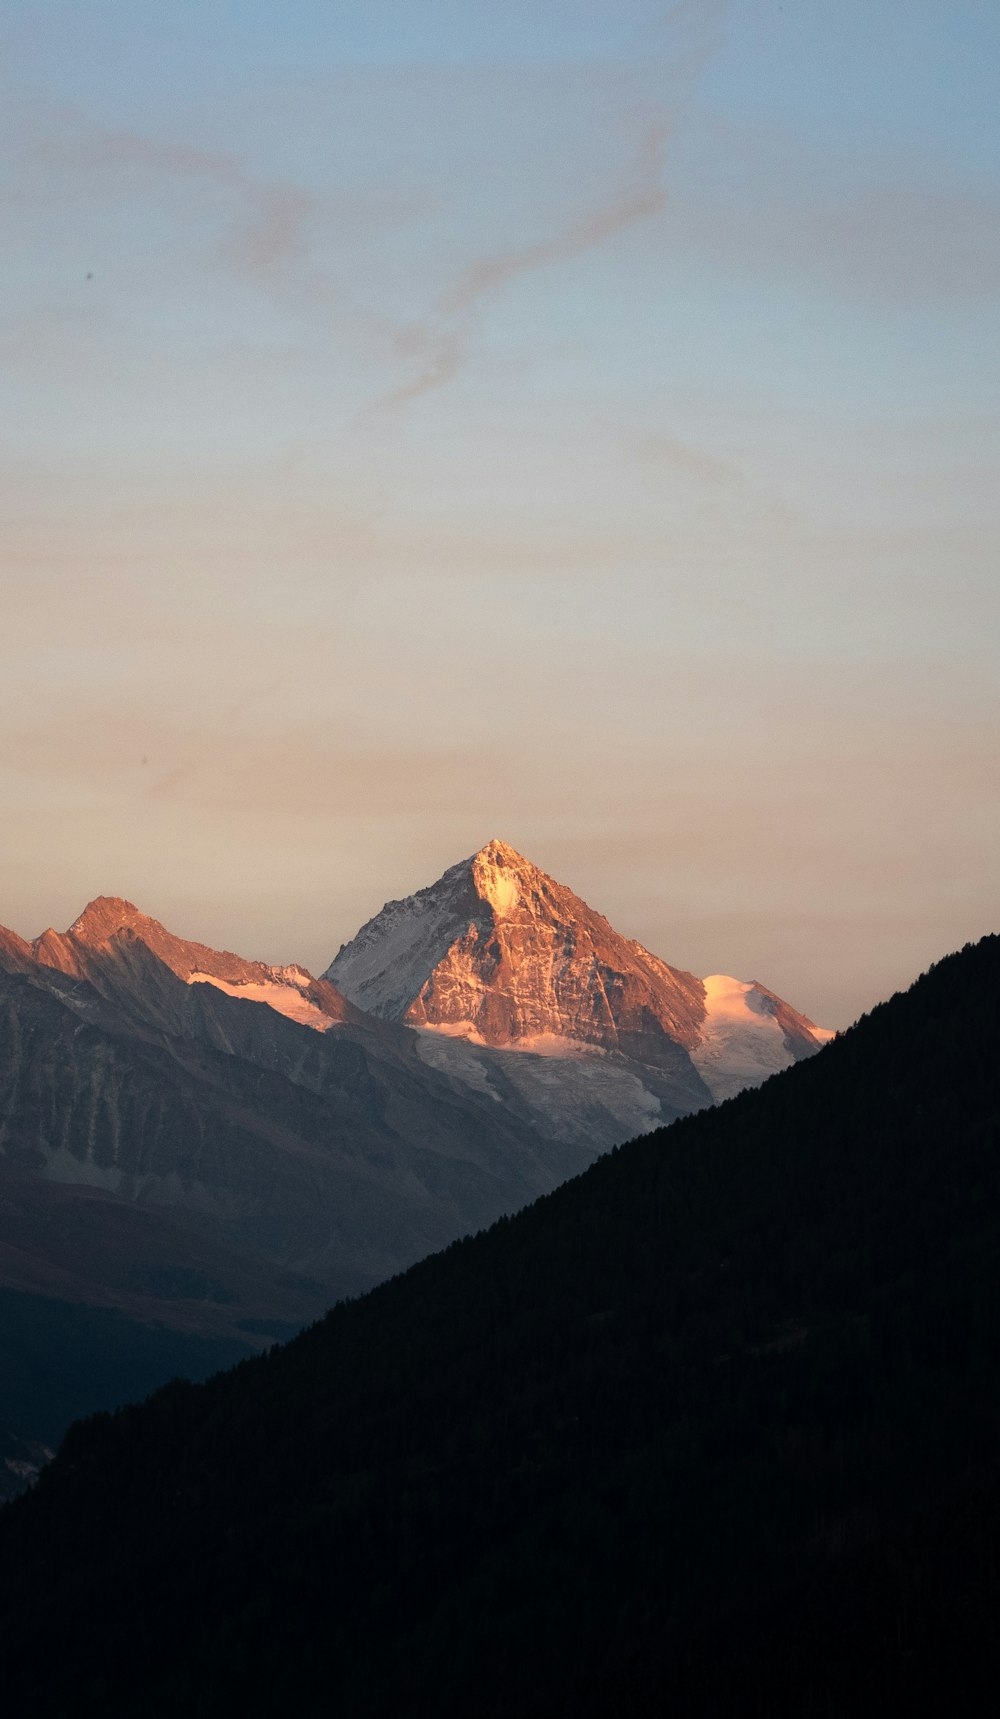 a view of a mountain at sunset from a distance